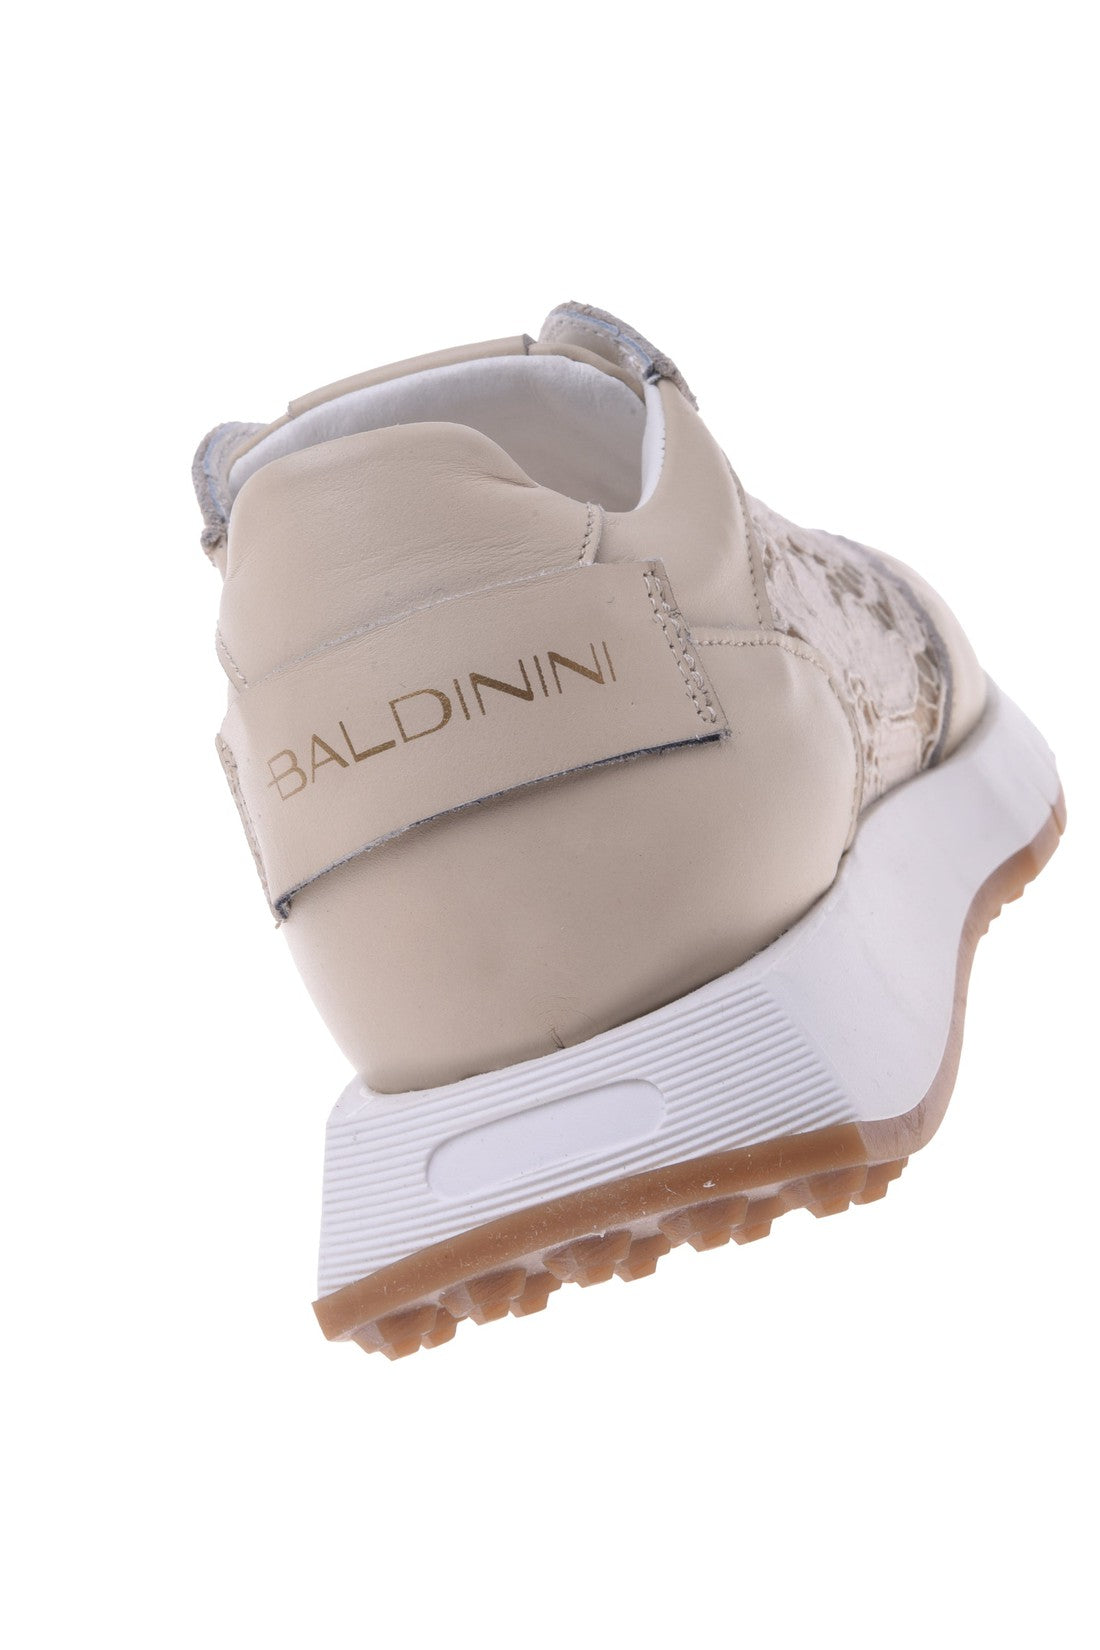 Sneaker in nude nappa leather and lace